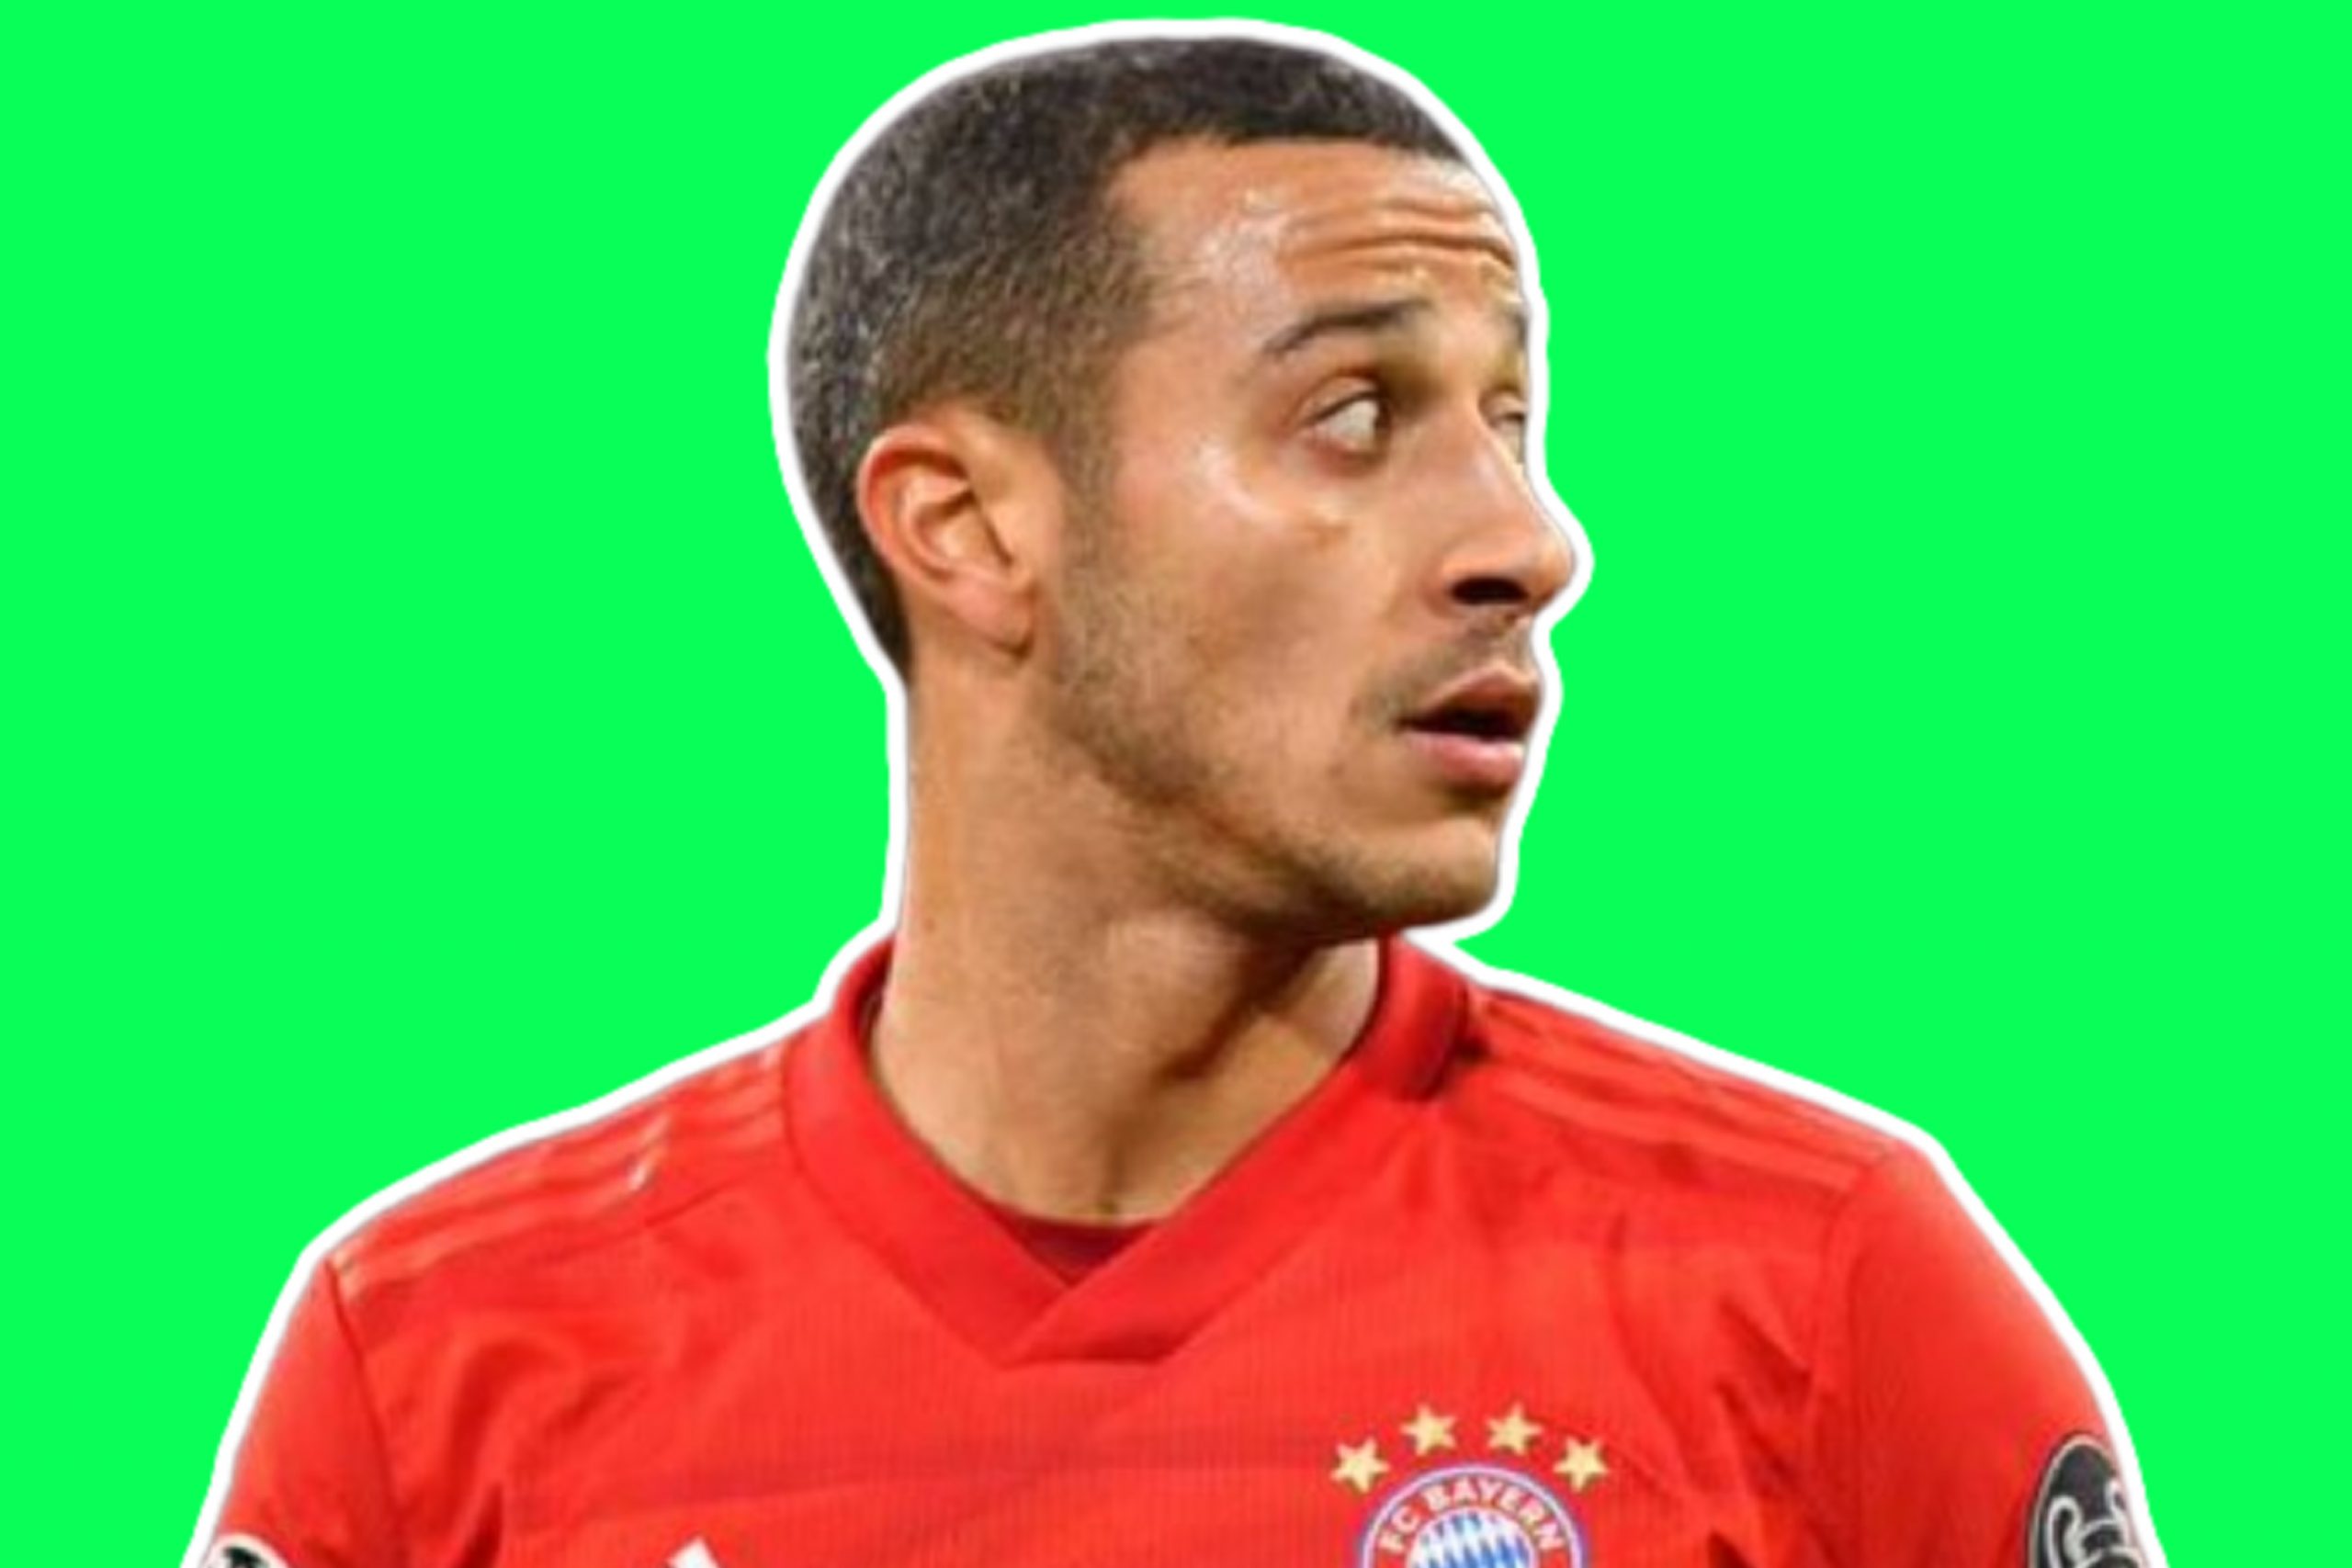 Individual highlights of Liverpool target Thiago Alcantara running the show for Bayern during win against Chelsea